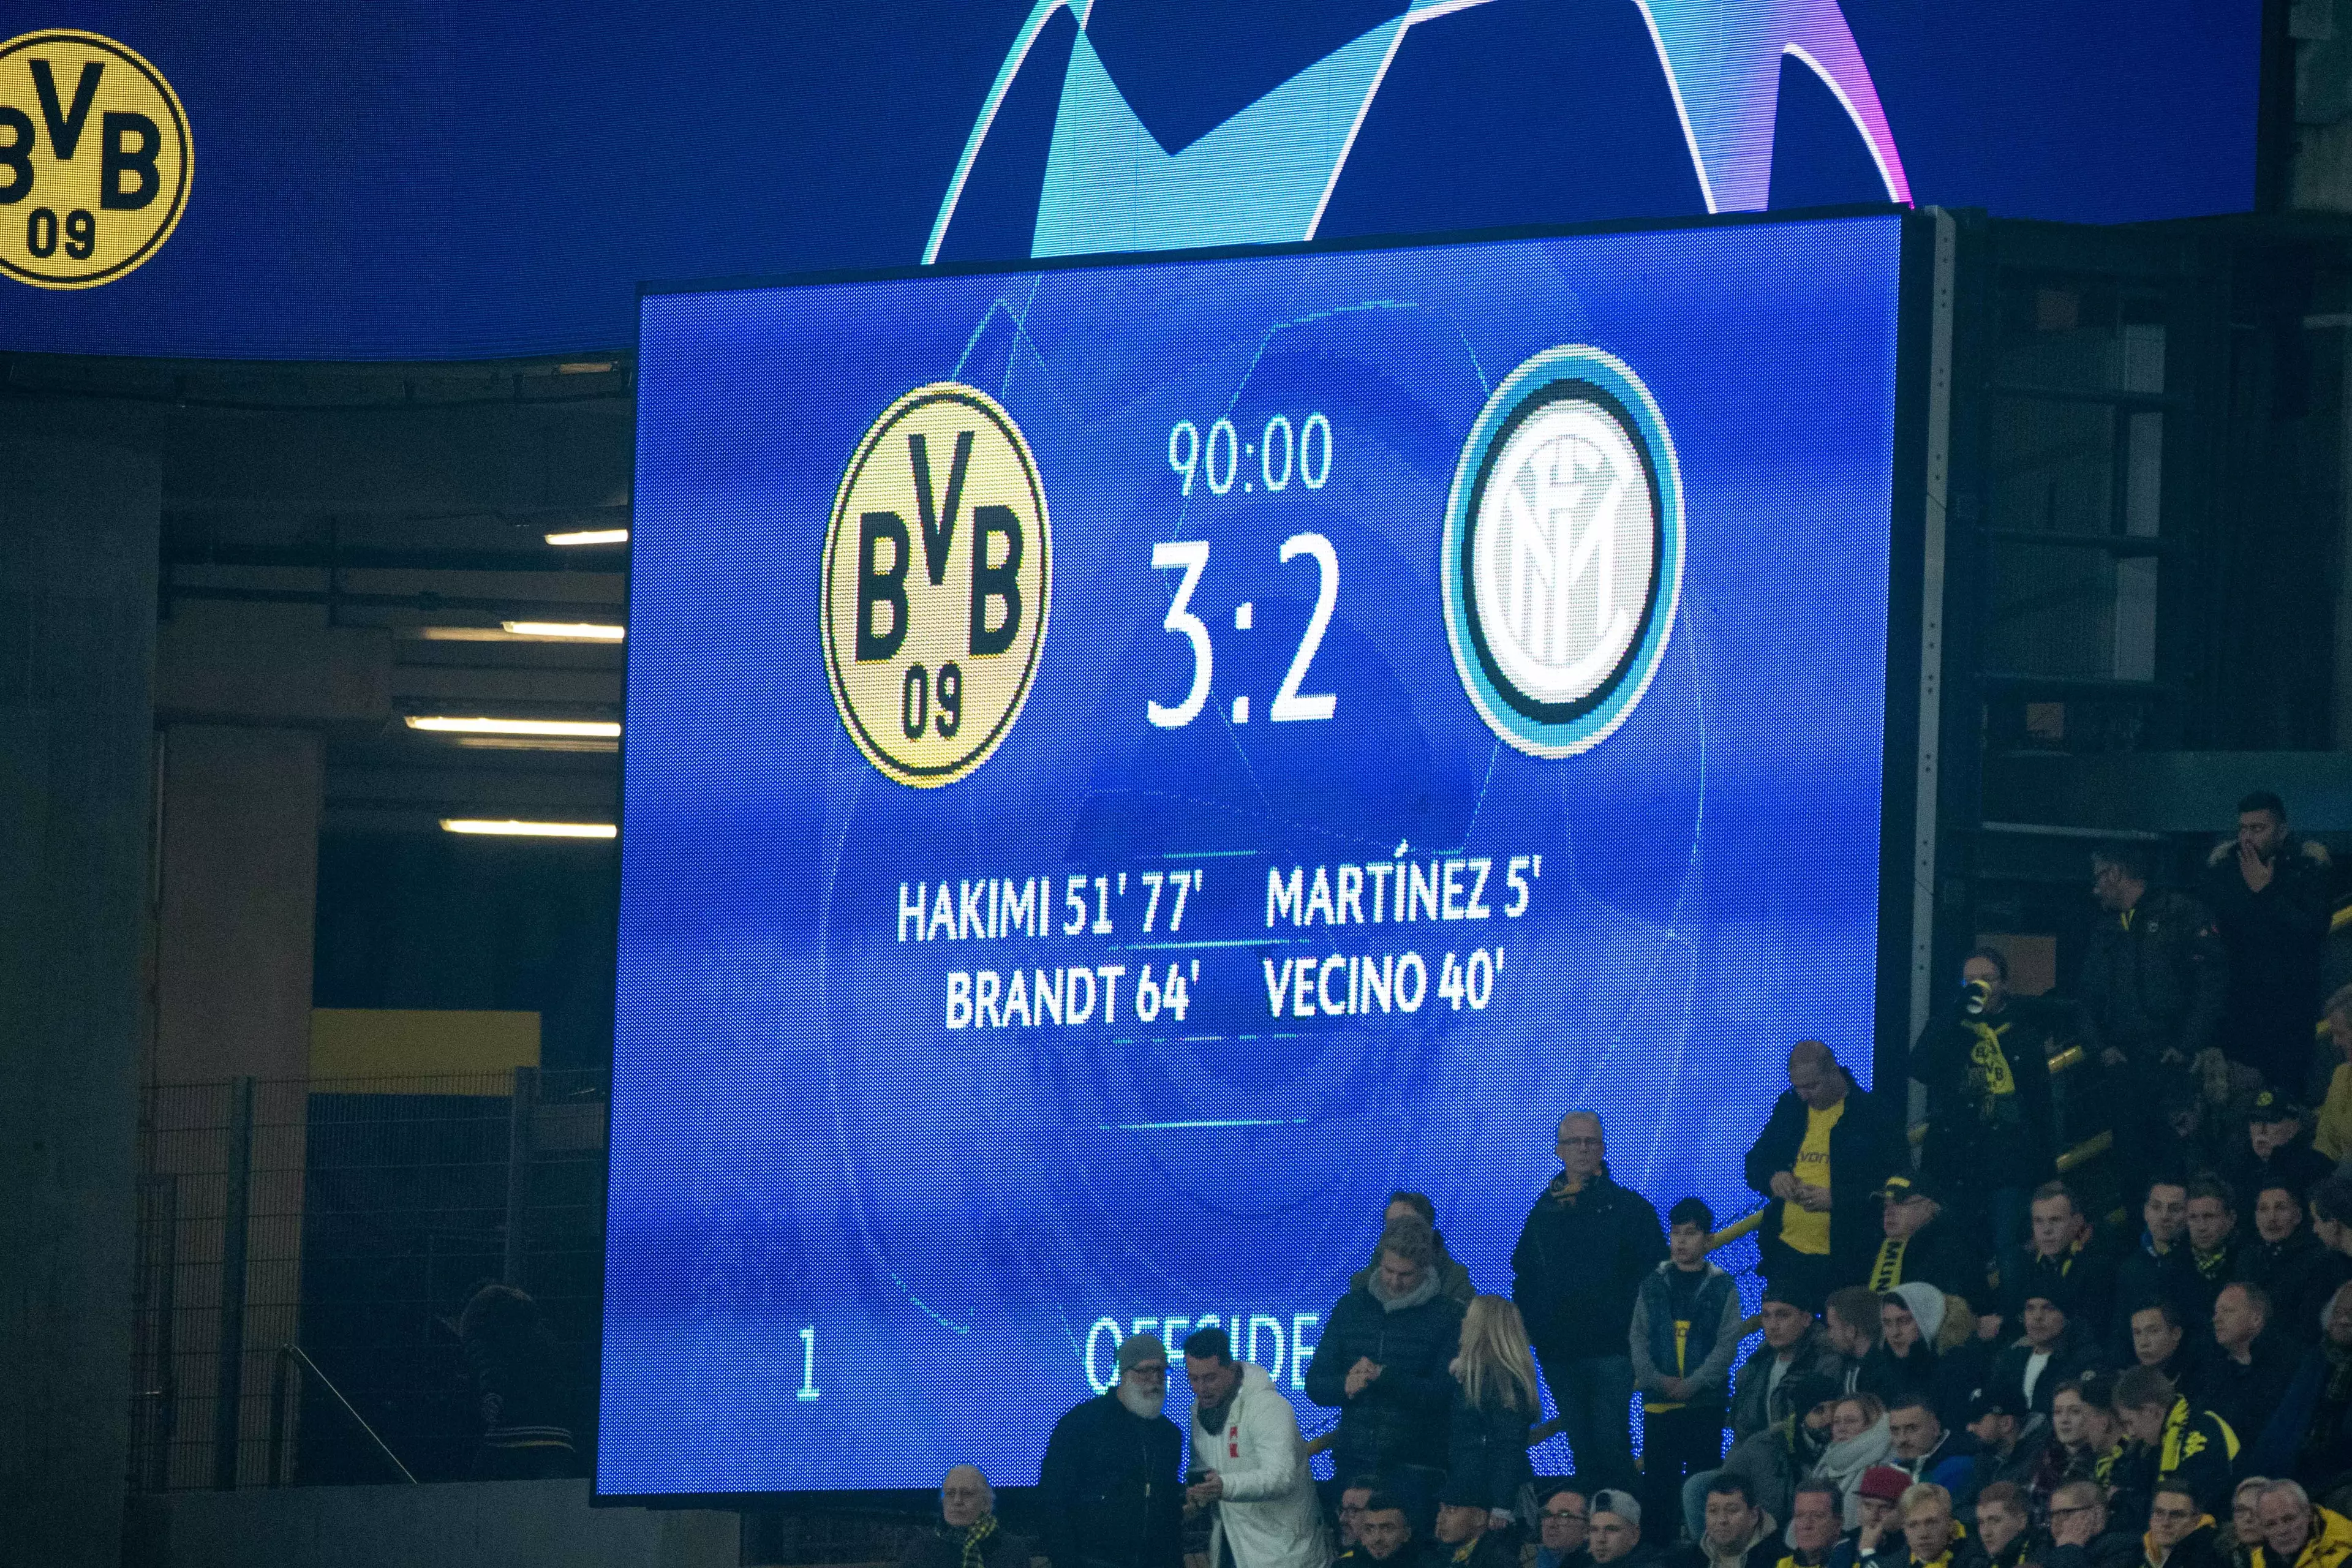 Inter led 2-0 against Dortmund but lost 3-2, the defining moment of their European campaign. Image: PA Images